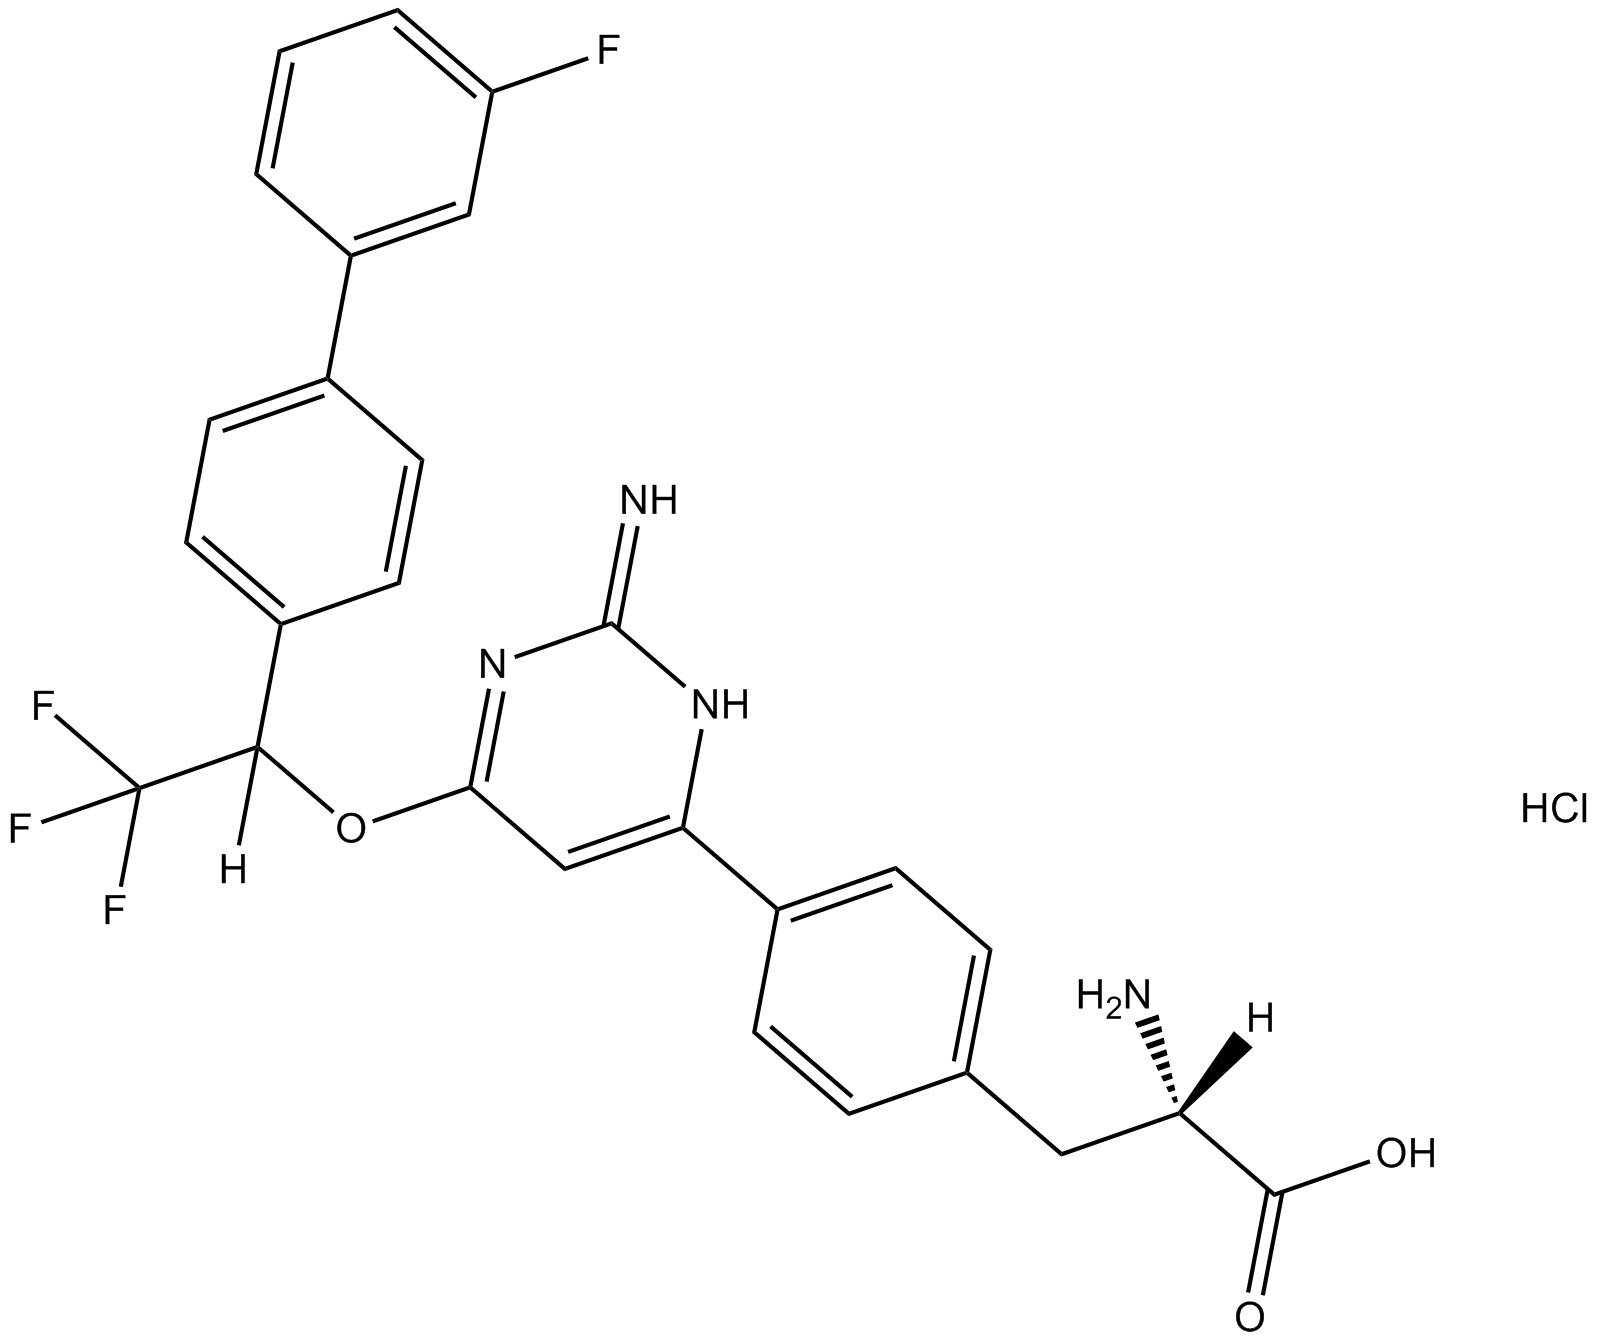 LP533401 hcl  Chemical Structure